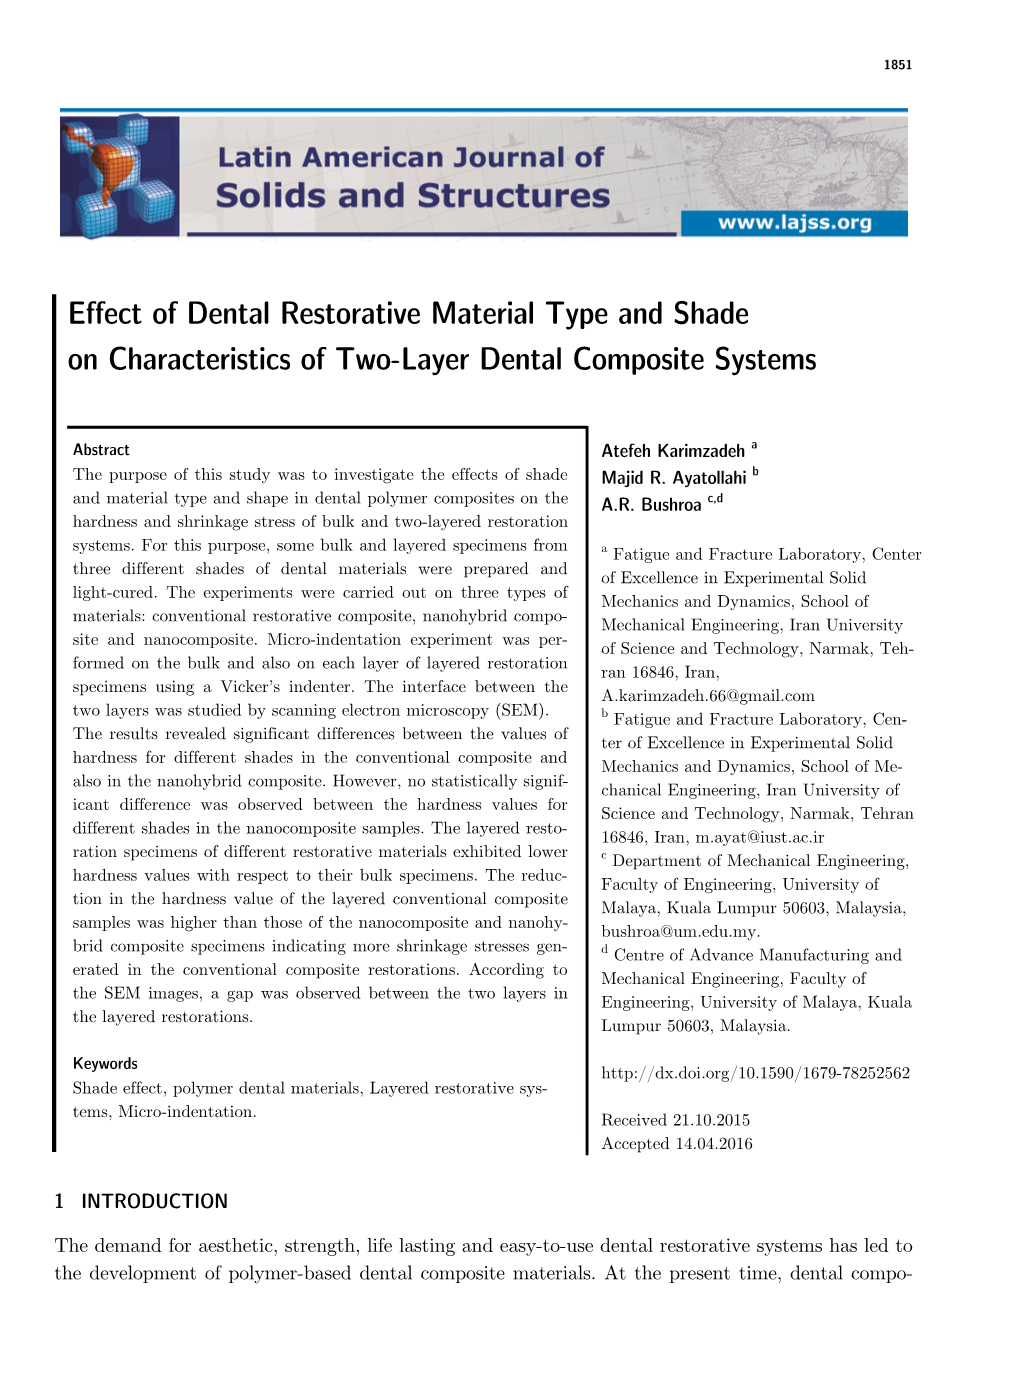 Effect of Dental Restorative Material Type and Shade on Characteristics of Two-Layer Dental Composite Systems